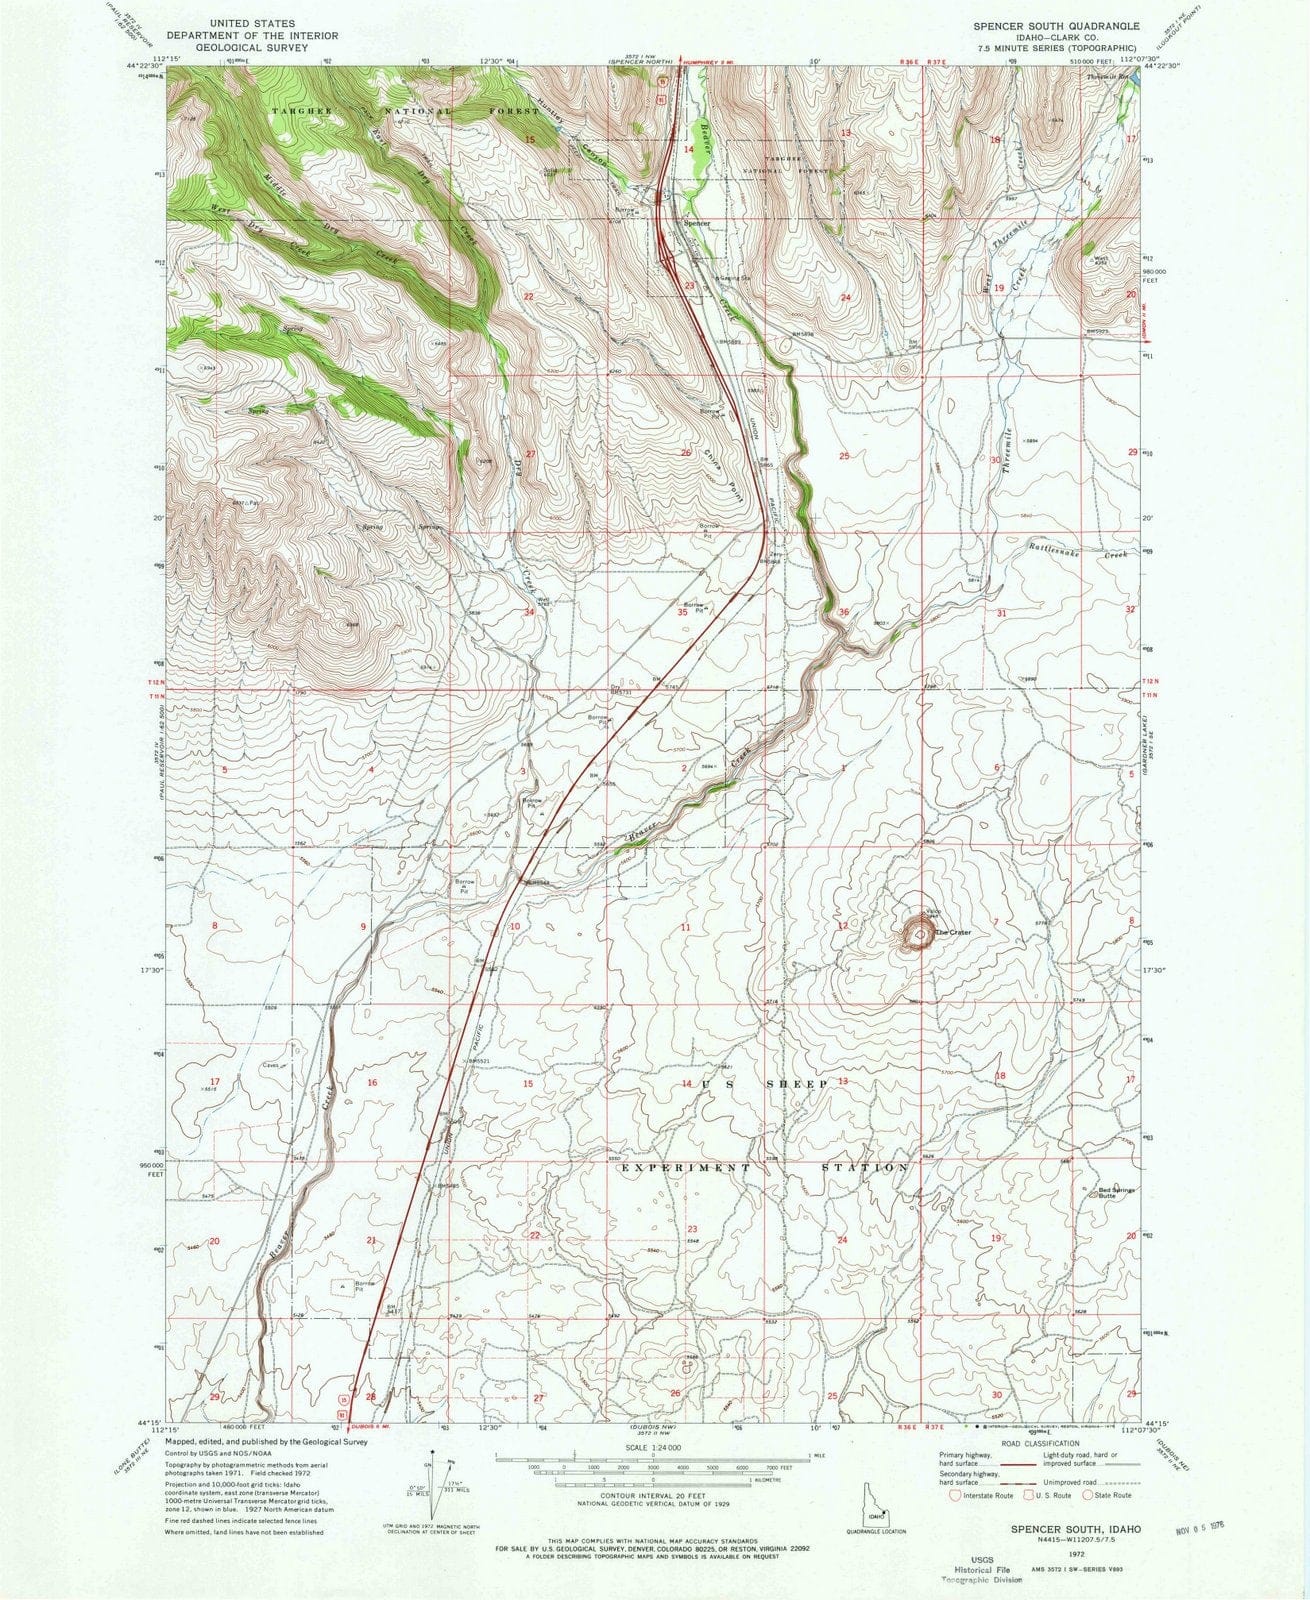 1972 Spencer South, ID - Idaho - USGS Topographic Map